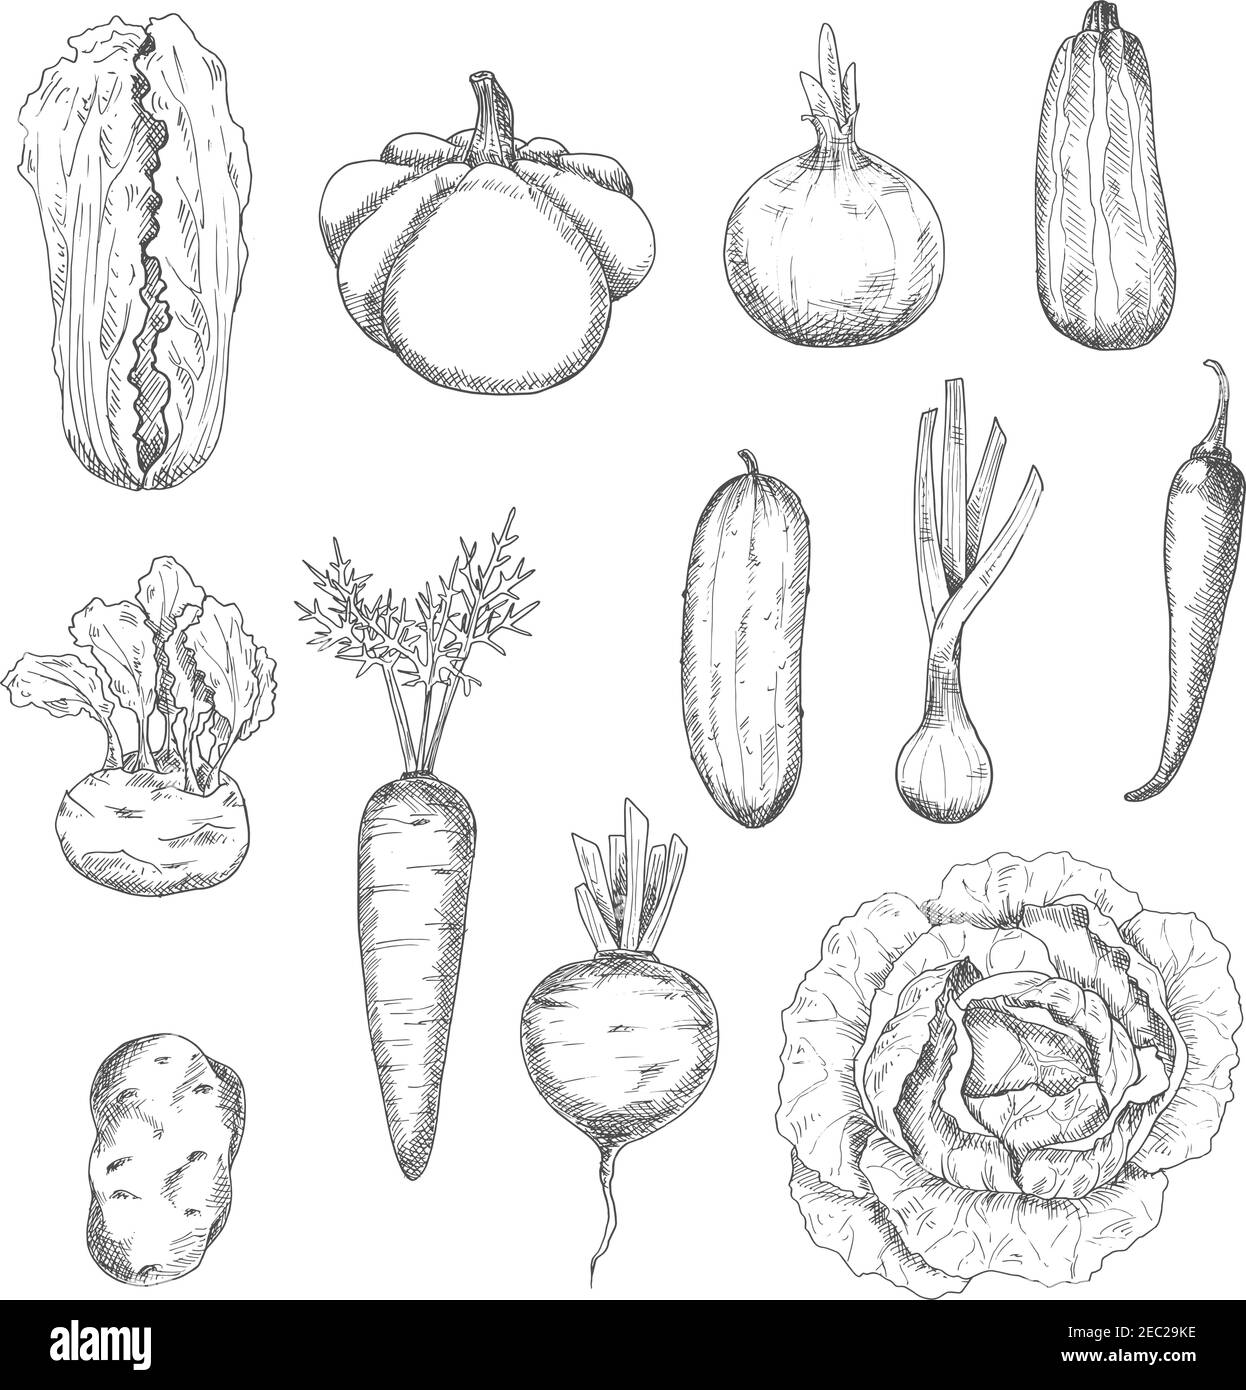 Freshly plucked selected cabbages, carrot, beetroot, onions, cayenne pepper, potato, cucumber, zucchini, kohlrabi and pattypan squash vegetables sketc Stock Vector